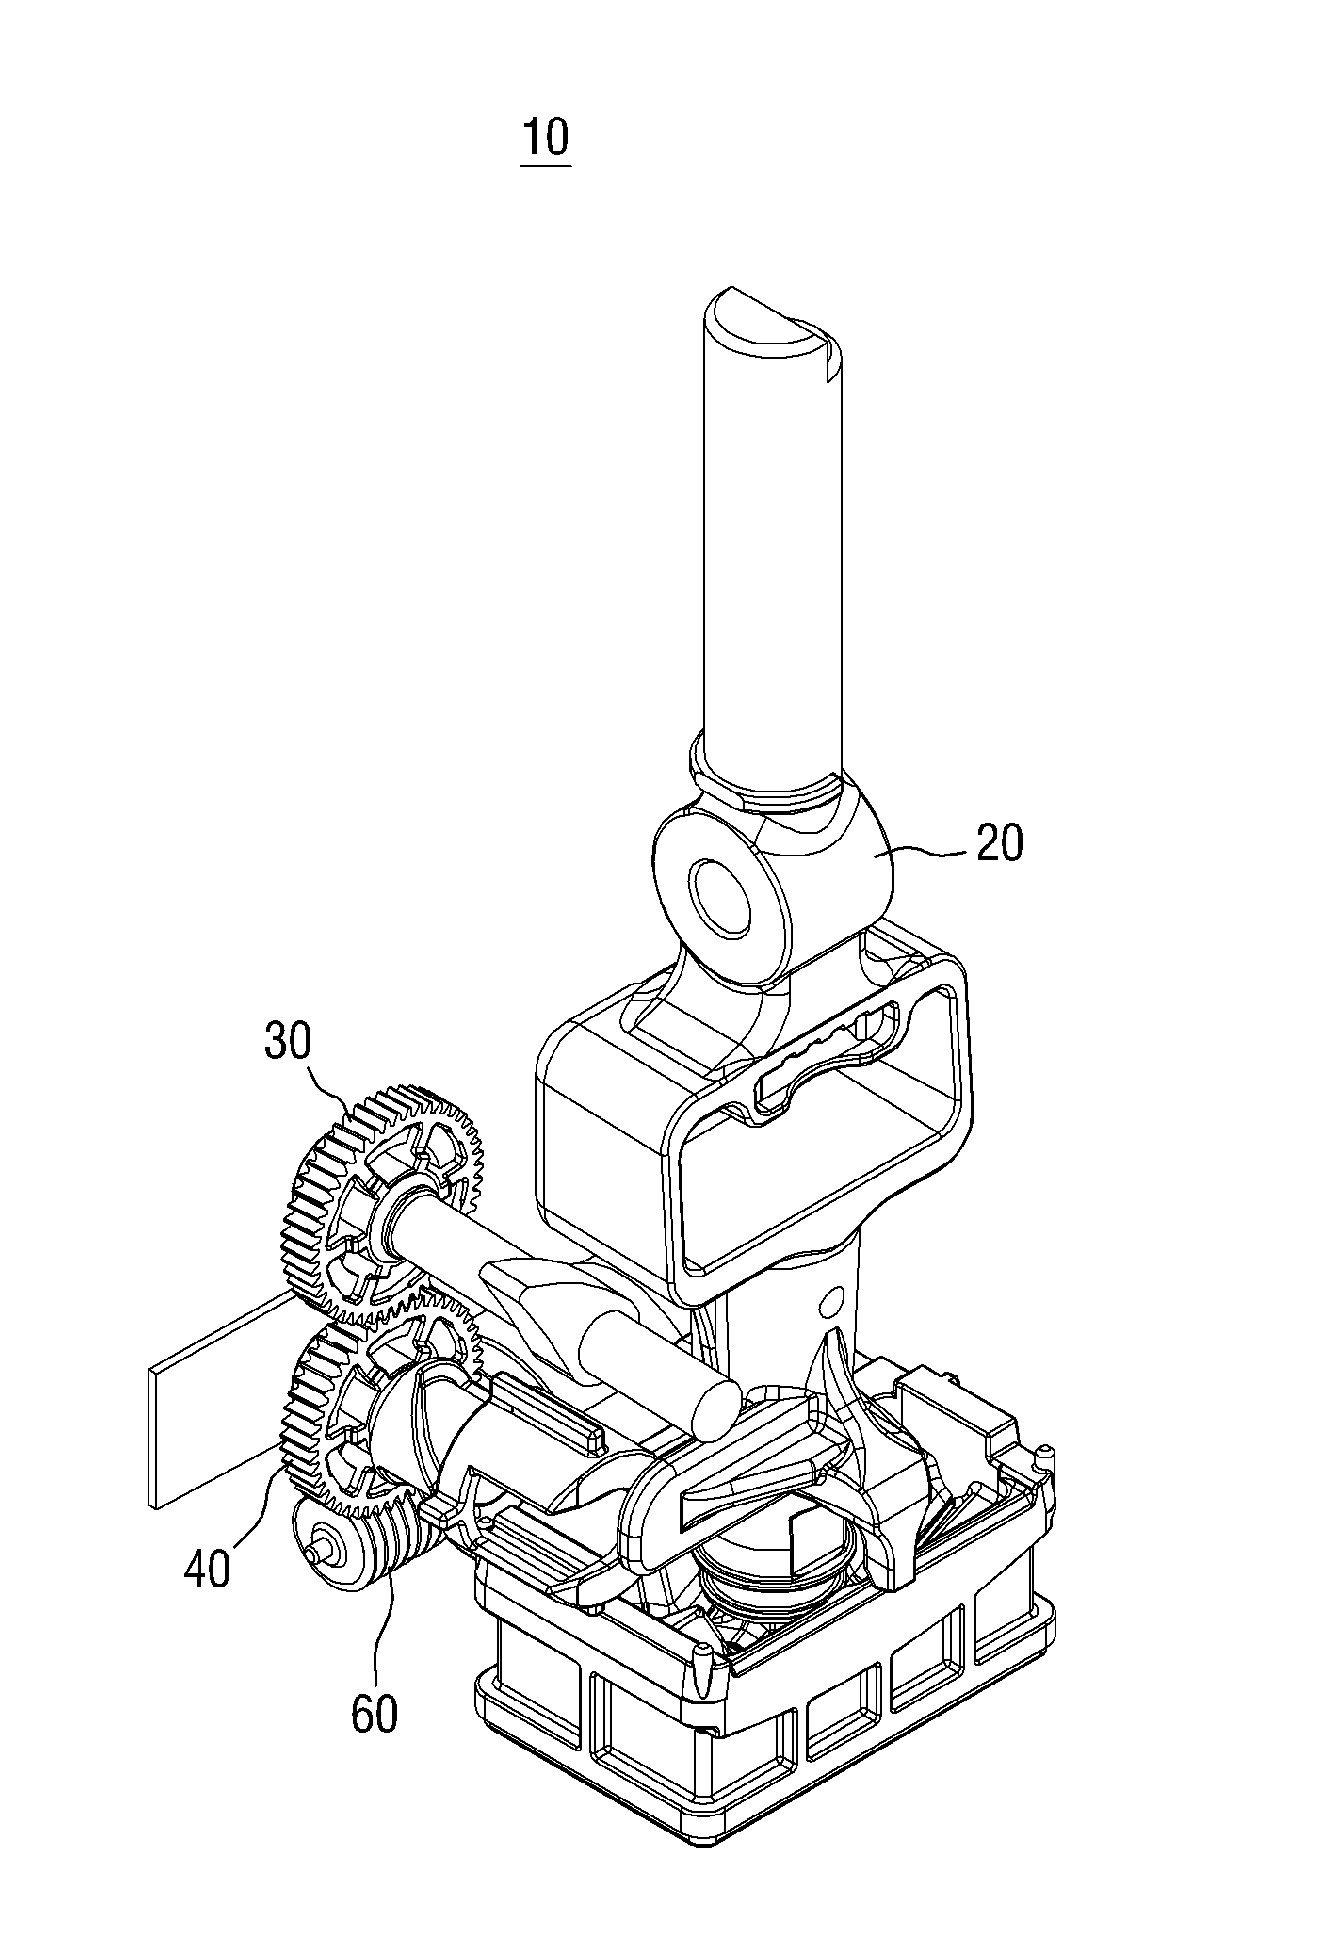 Apparatus for returning transmission to primary mode